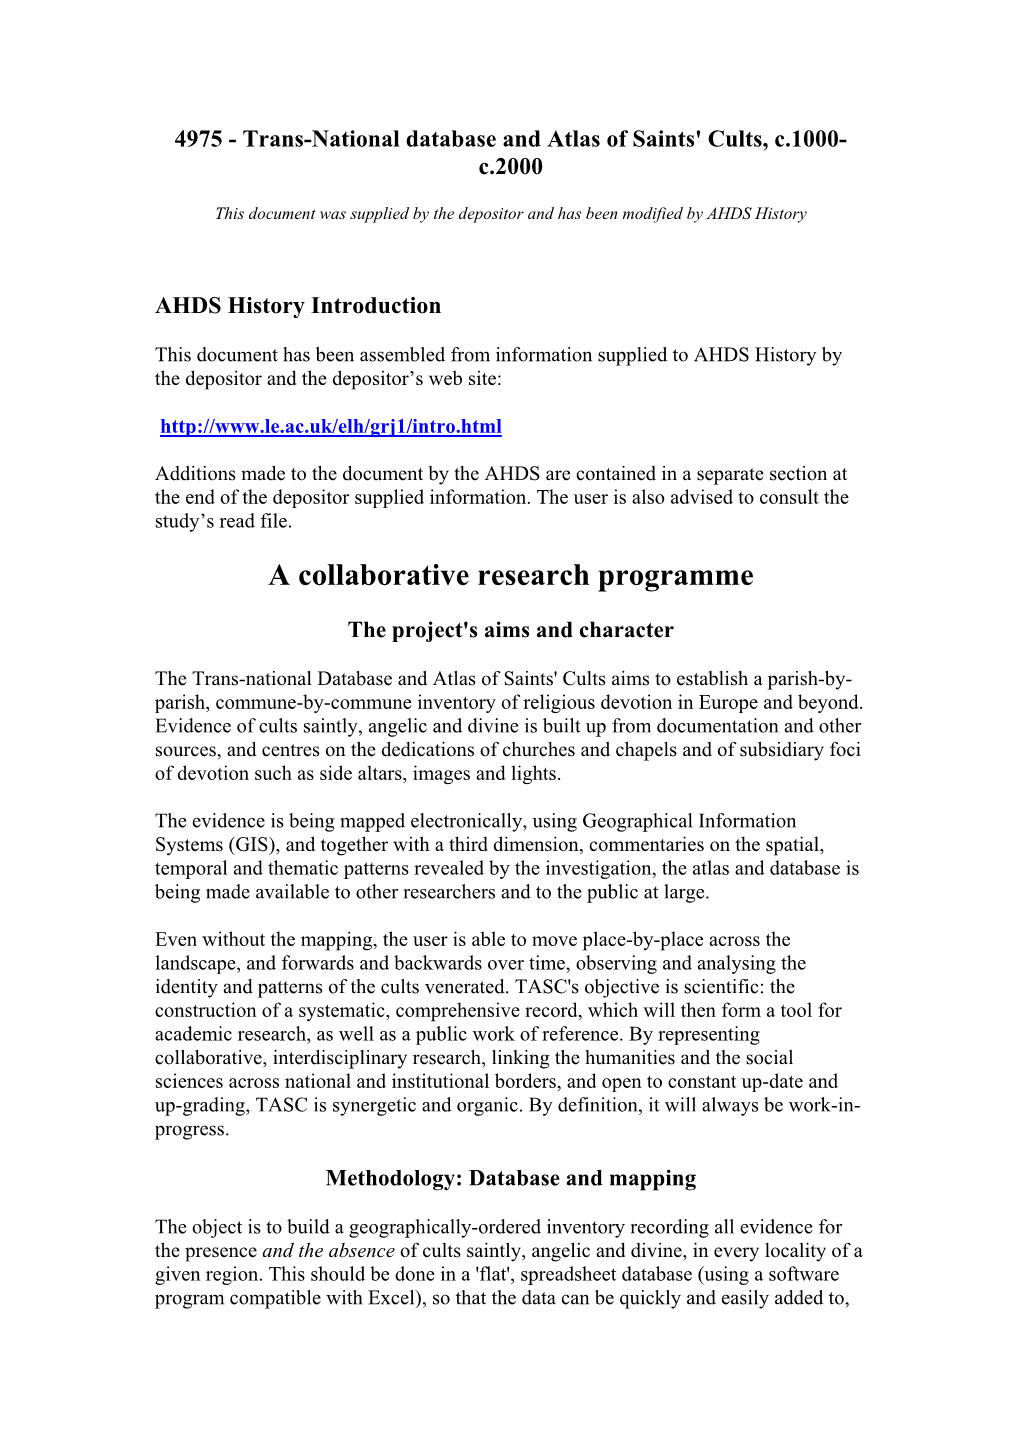 A Collaborative Research Programme